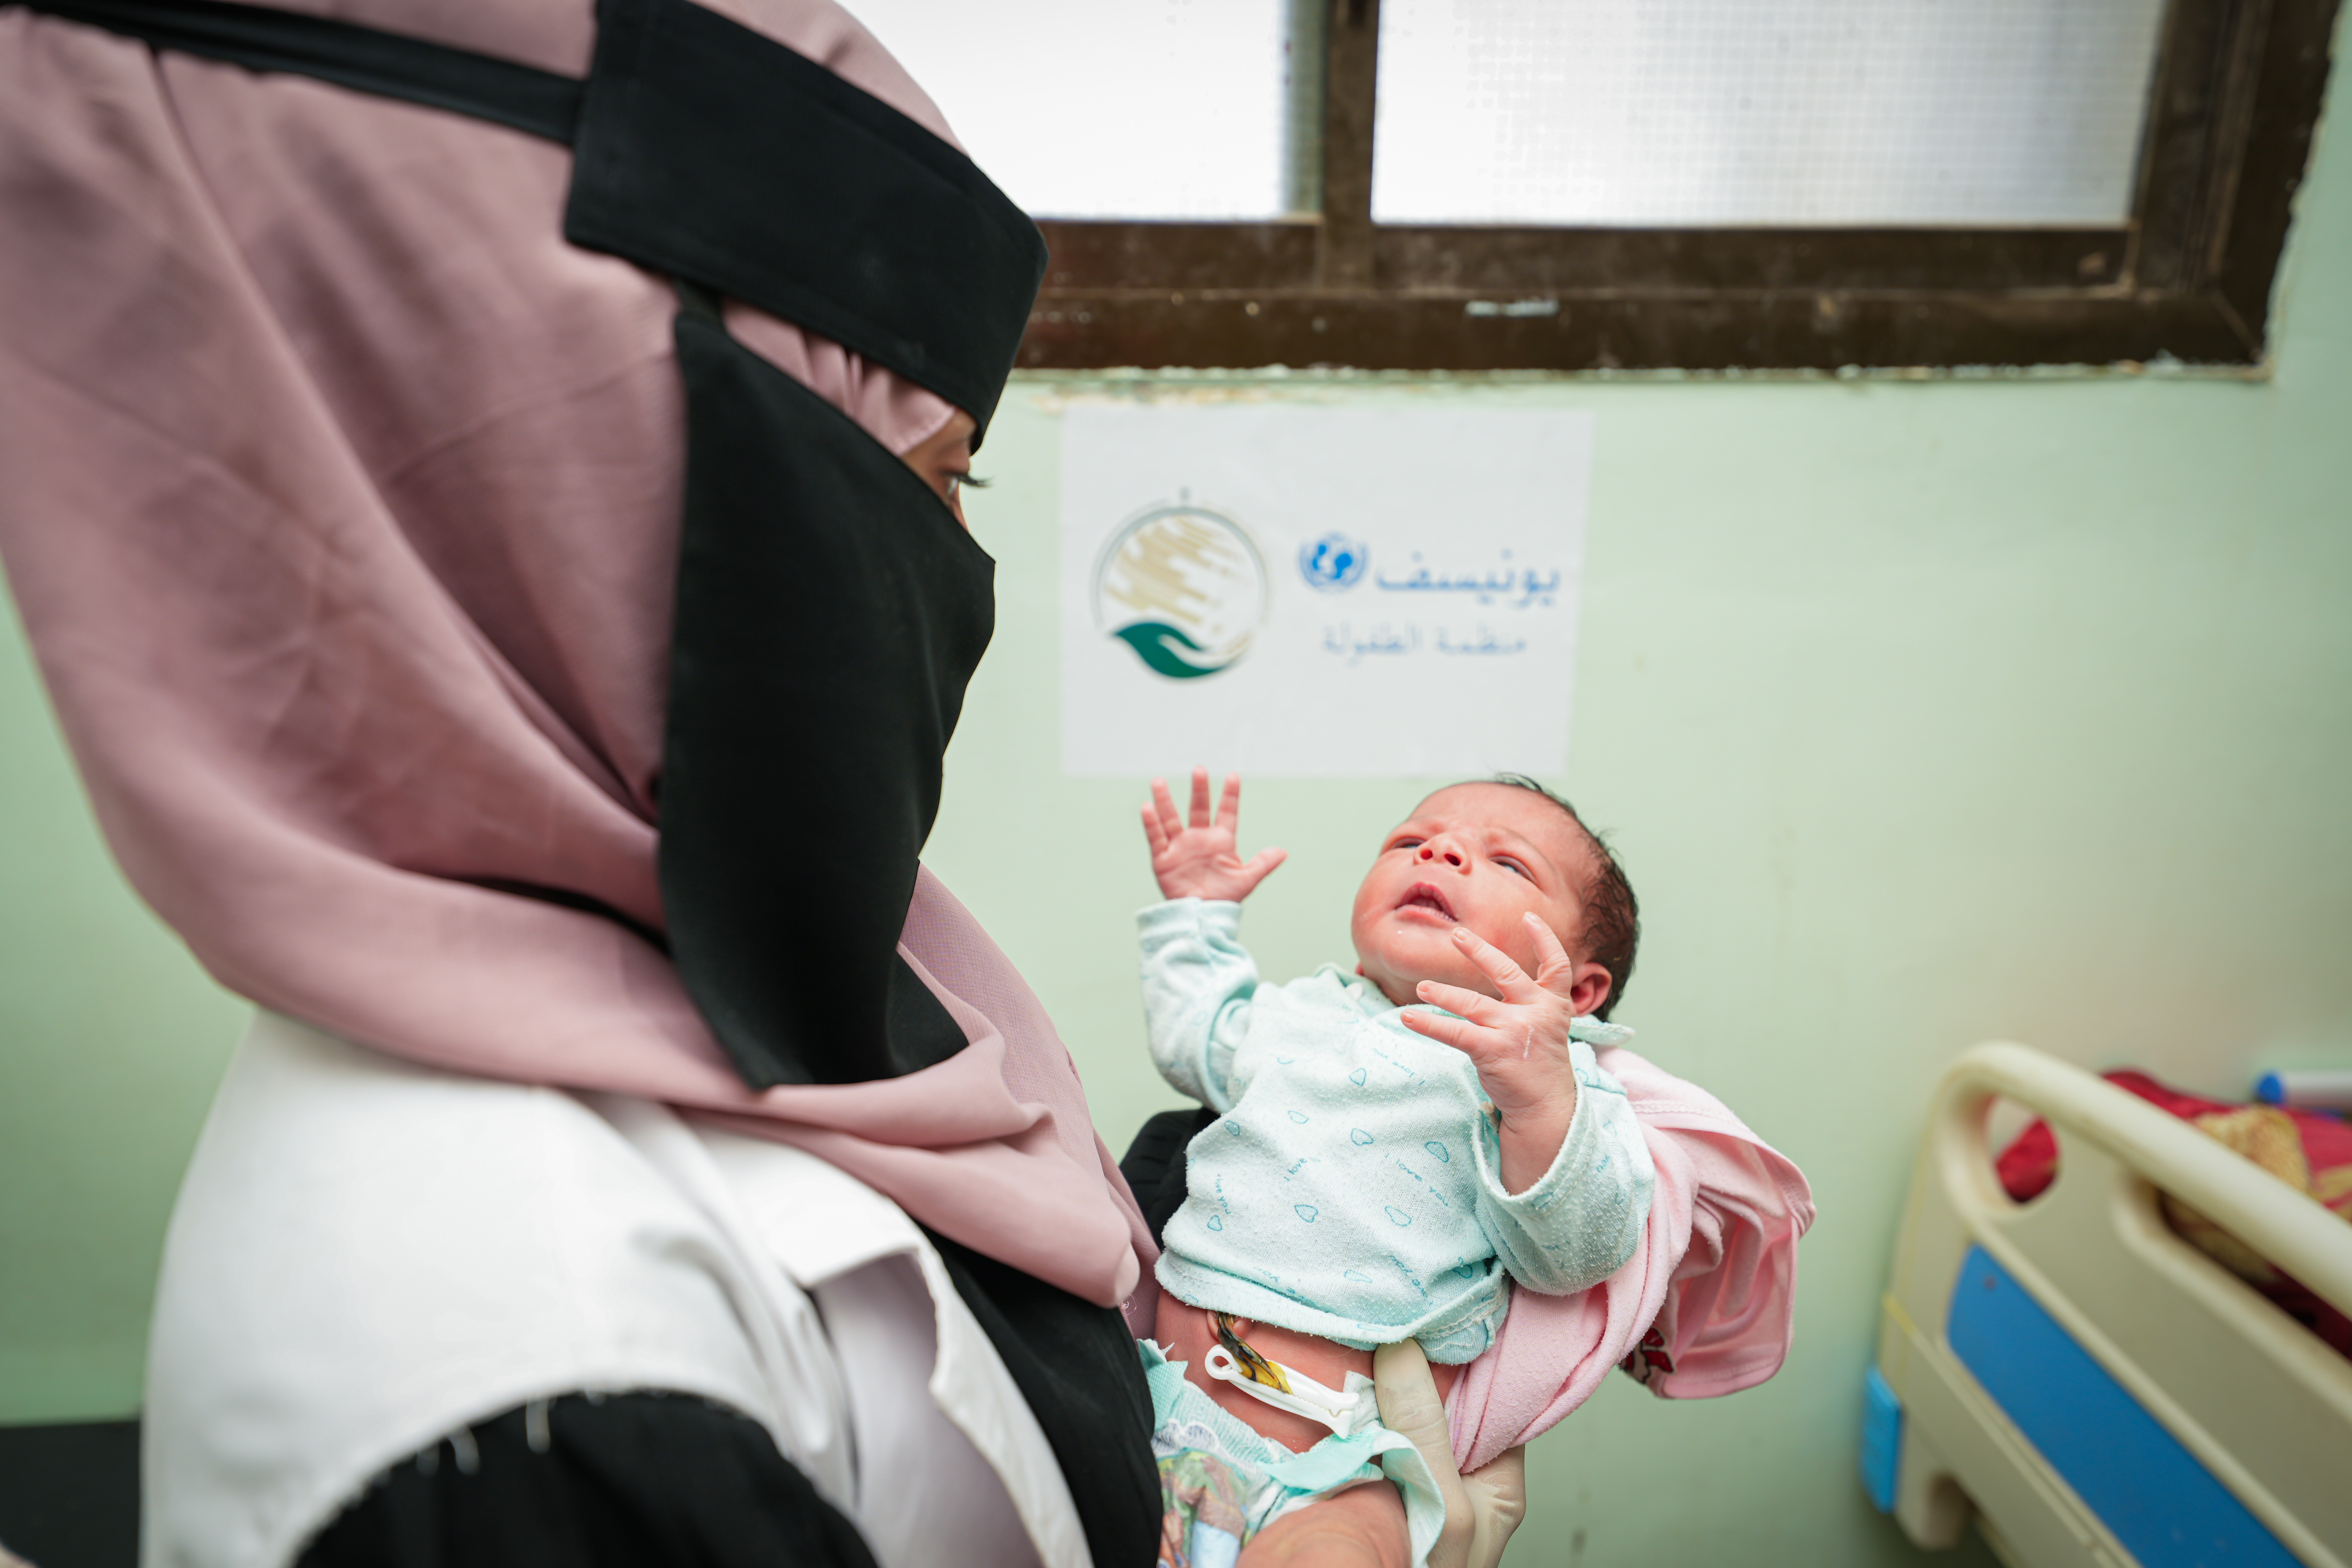 Aydah with a newborn in the admission room in Al-Shaheed Mahnaf Hospital in Loader district, Abyan governorate, Yemen. UNICEF and the King Salman Center for Relief and Charity supported maternal and neonatal health services at Loader Hospital in Abyan Governorate